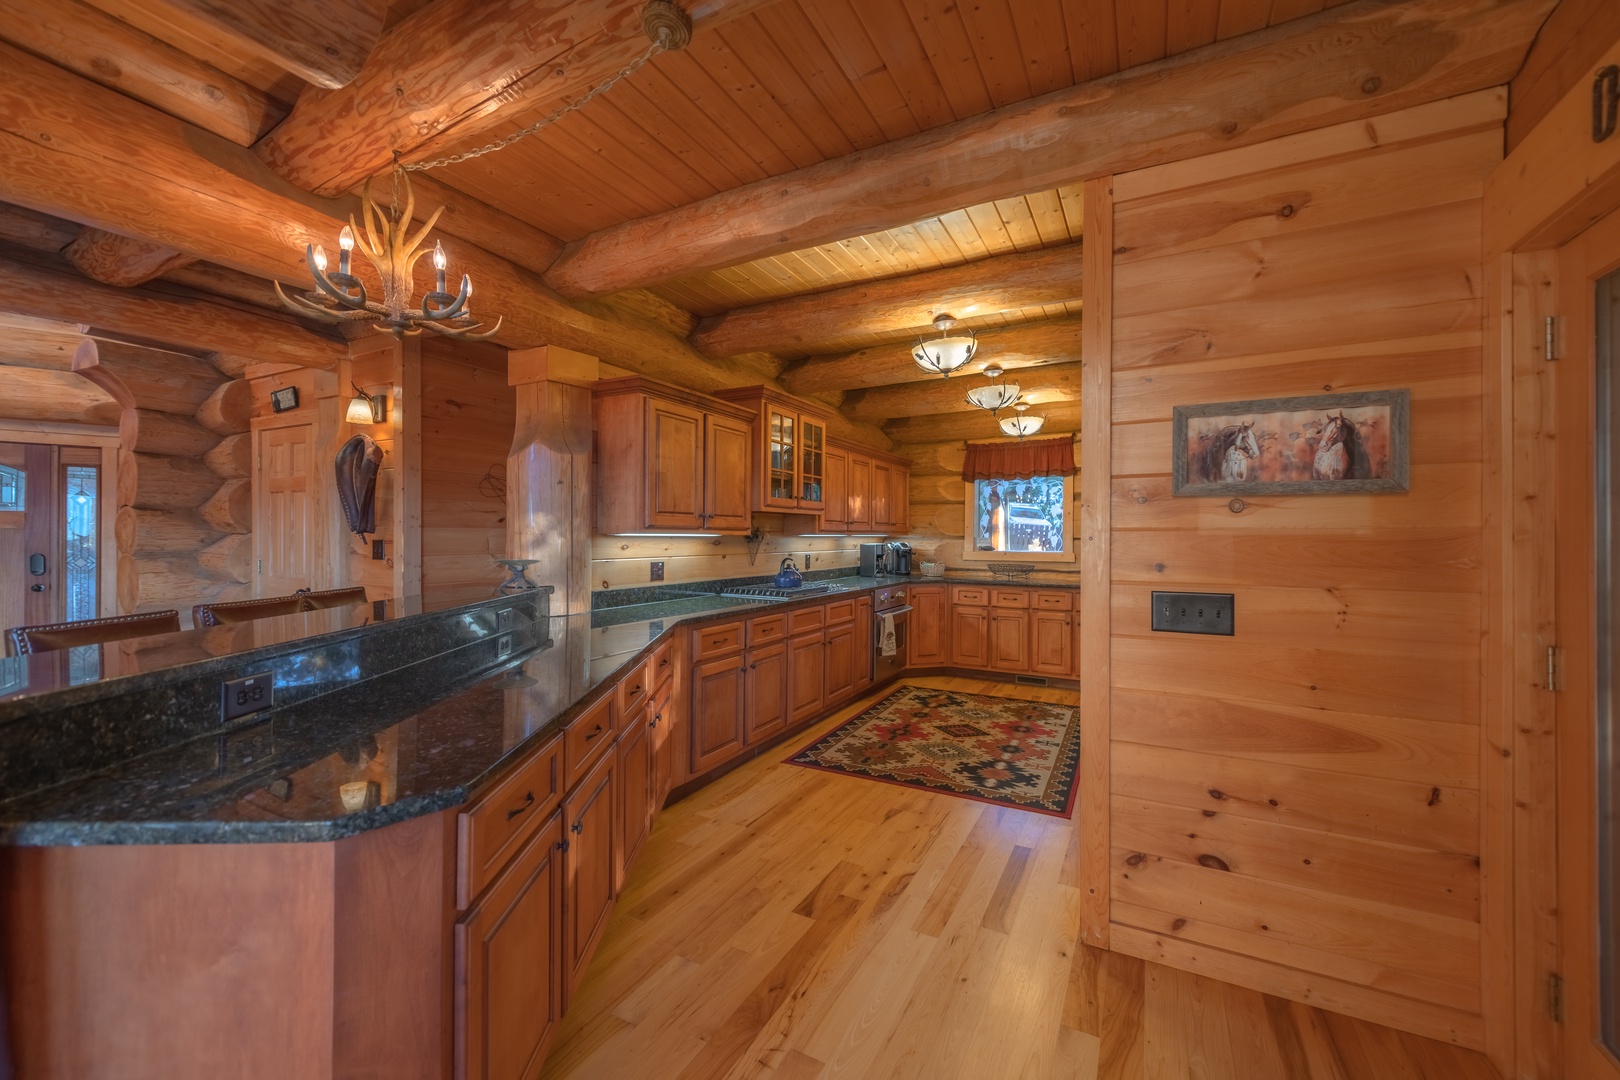 Saddle Lodge - Fully Equipped Spacious Kitchen